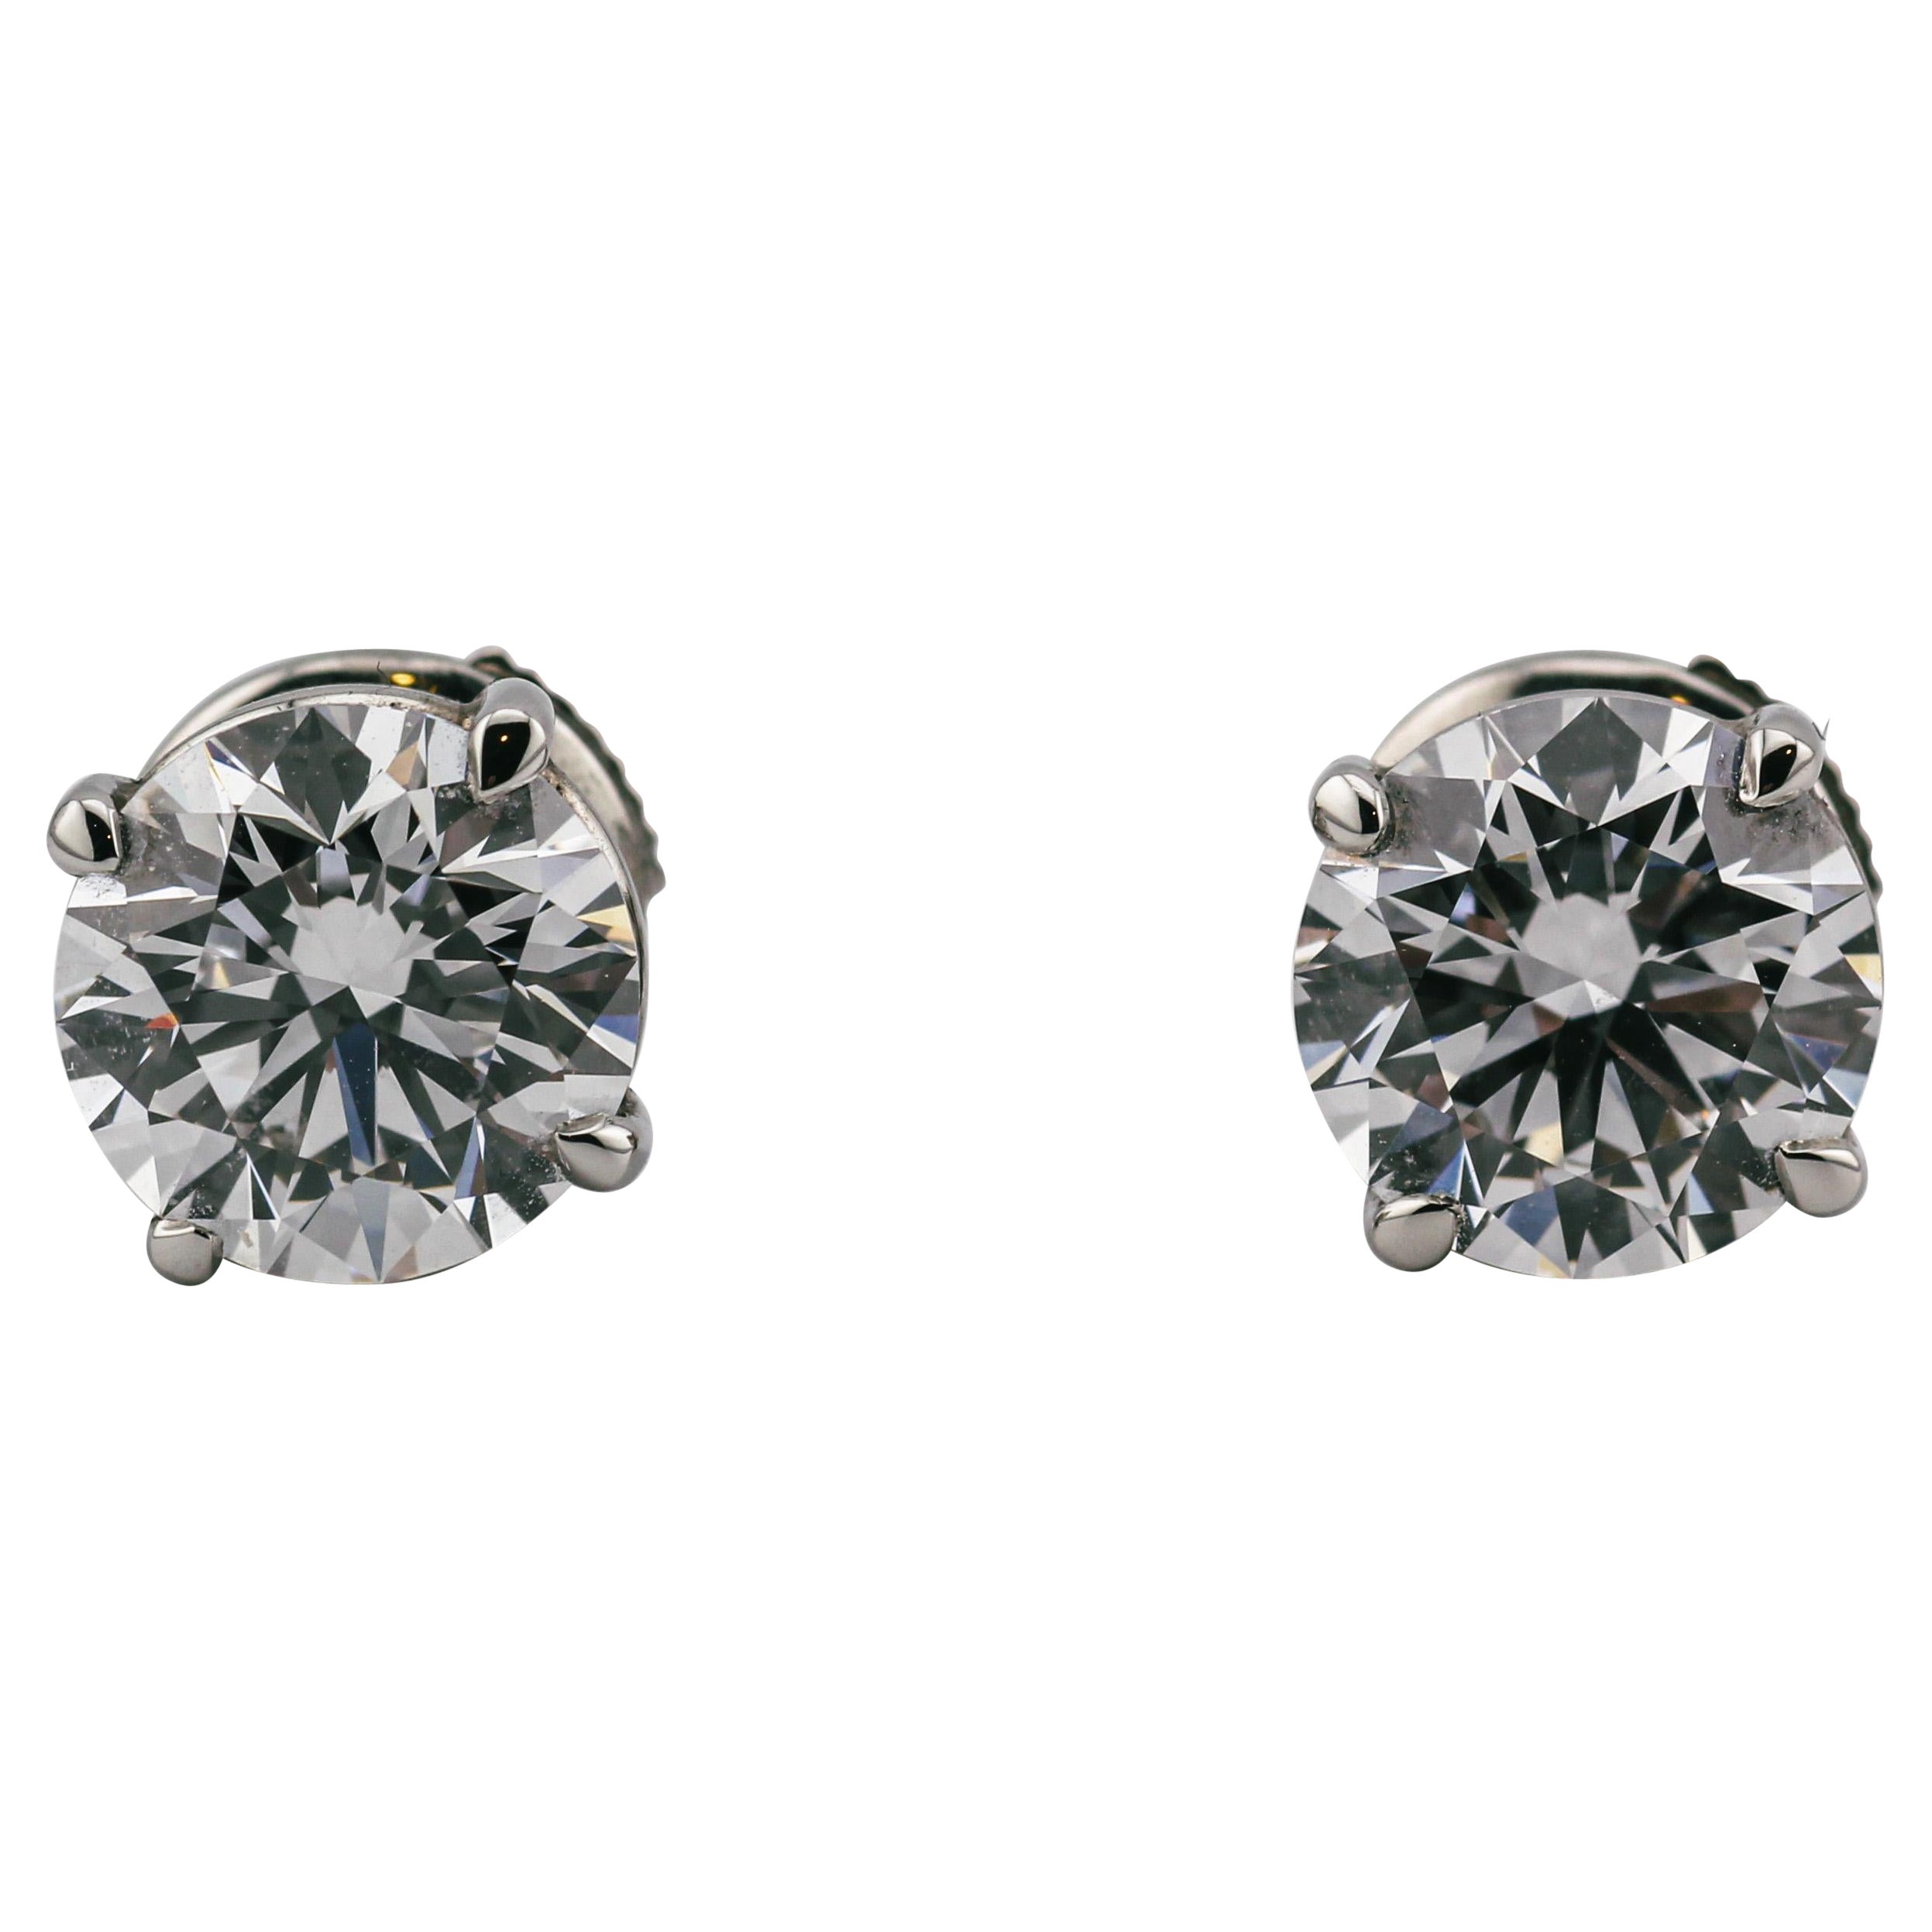 GIA Certified 1.55 + 1.51 D Color IF Clarity Diamond Platinum Studs Earrings For Sale